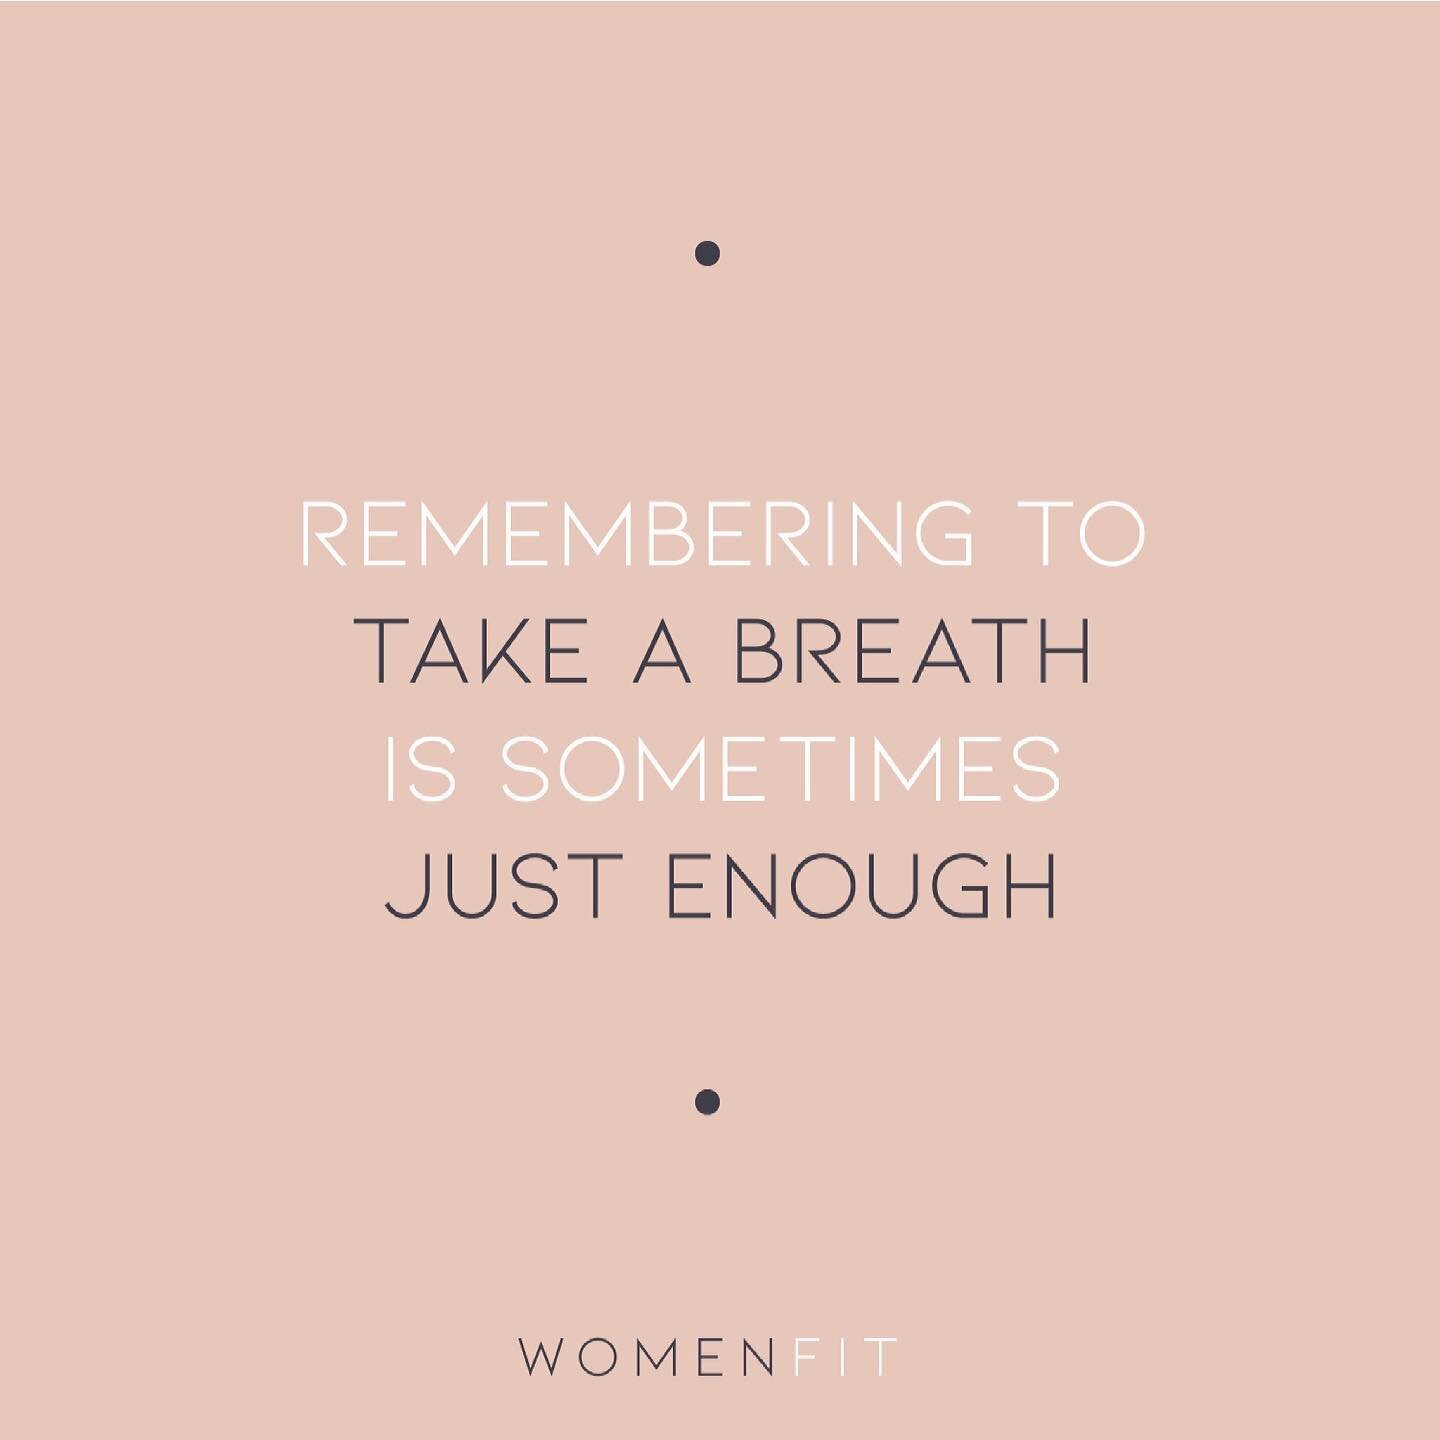 It&rsquo;s 💯 ok to have done nothing else but breathe today. 
Sometimes the to do list goes to S**t and our superwomen tendencies have to be briefly put on hold. 
Take a breathe, step back and remember there is always a next time 💫
&bull;
&bull;
&b